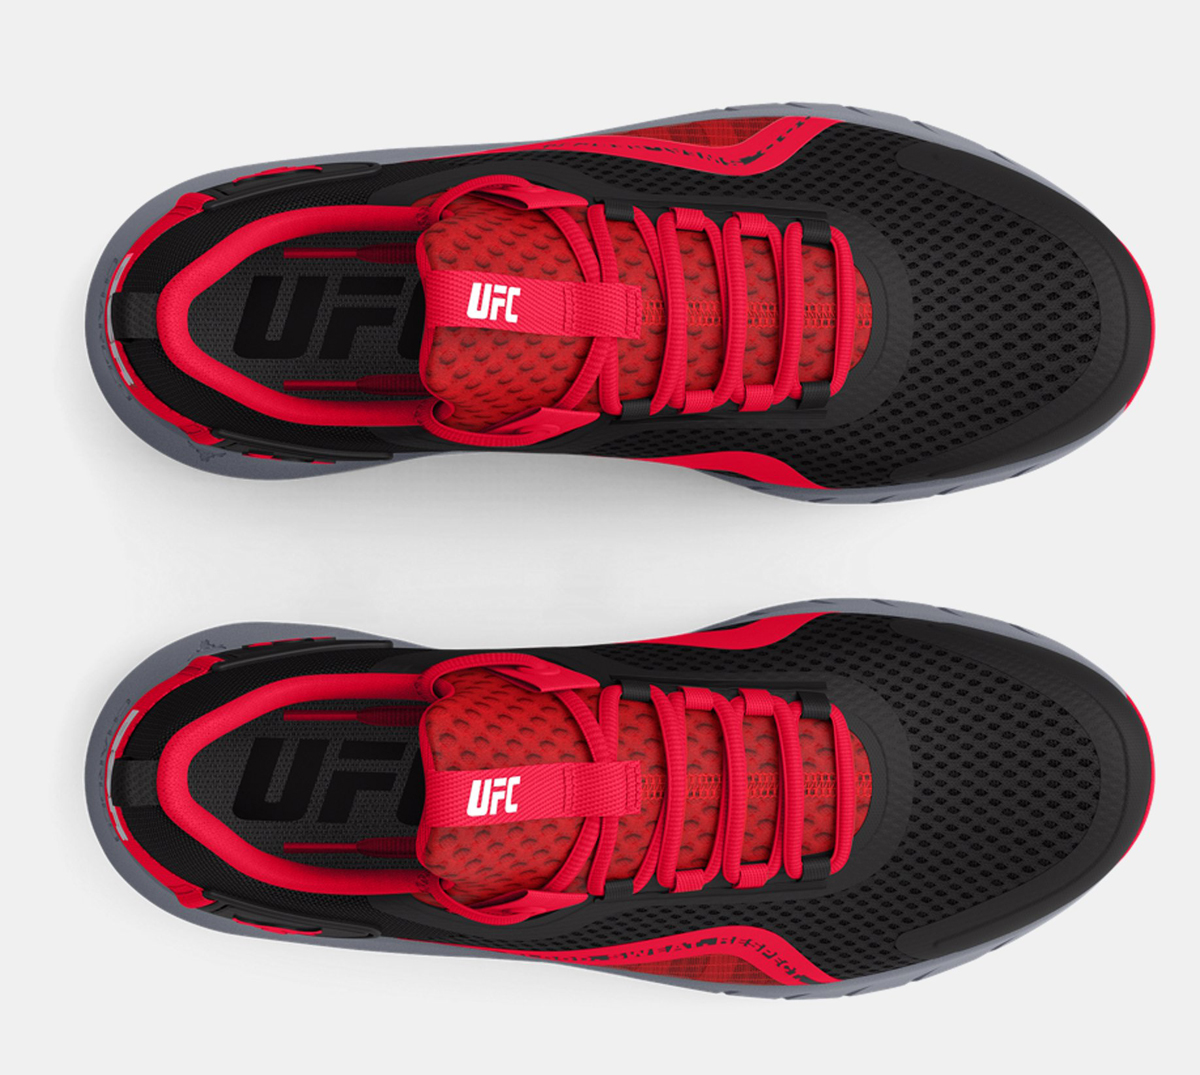 Where to Buy the UFC Project Rock BSR 3 Shoes